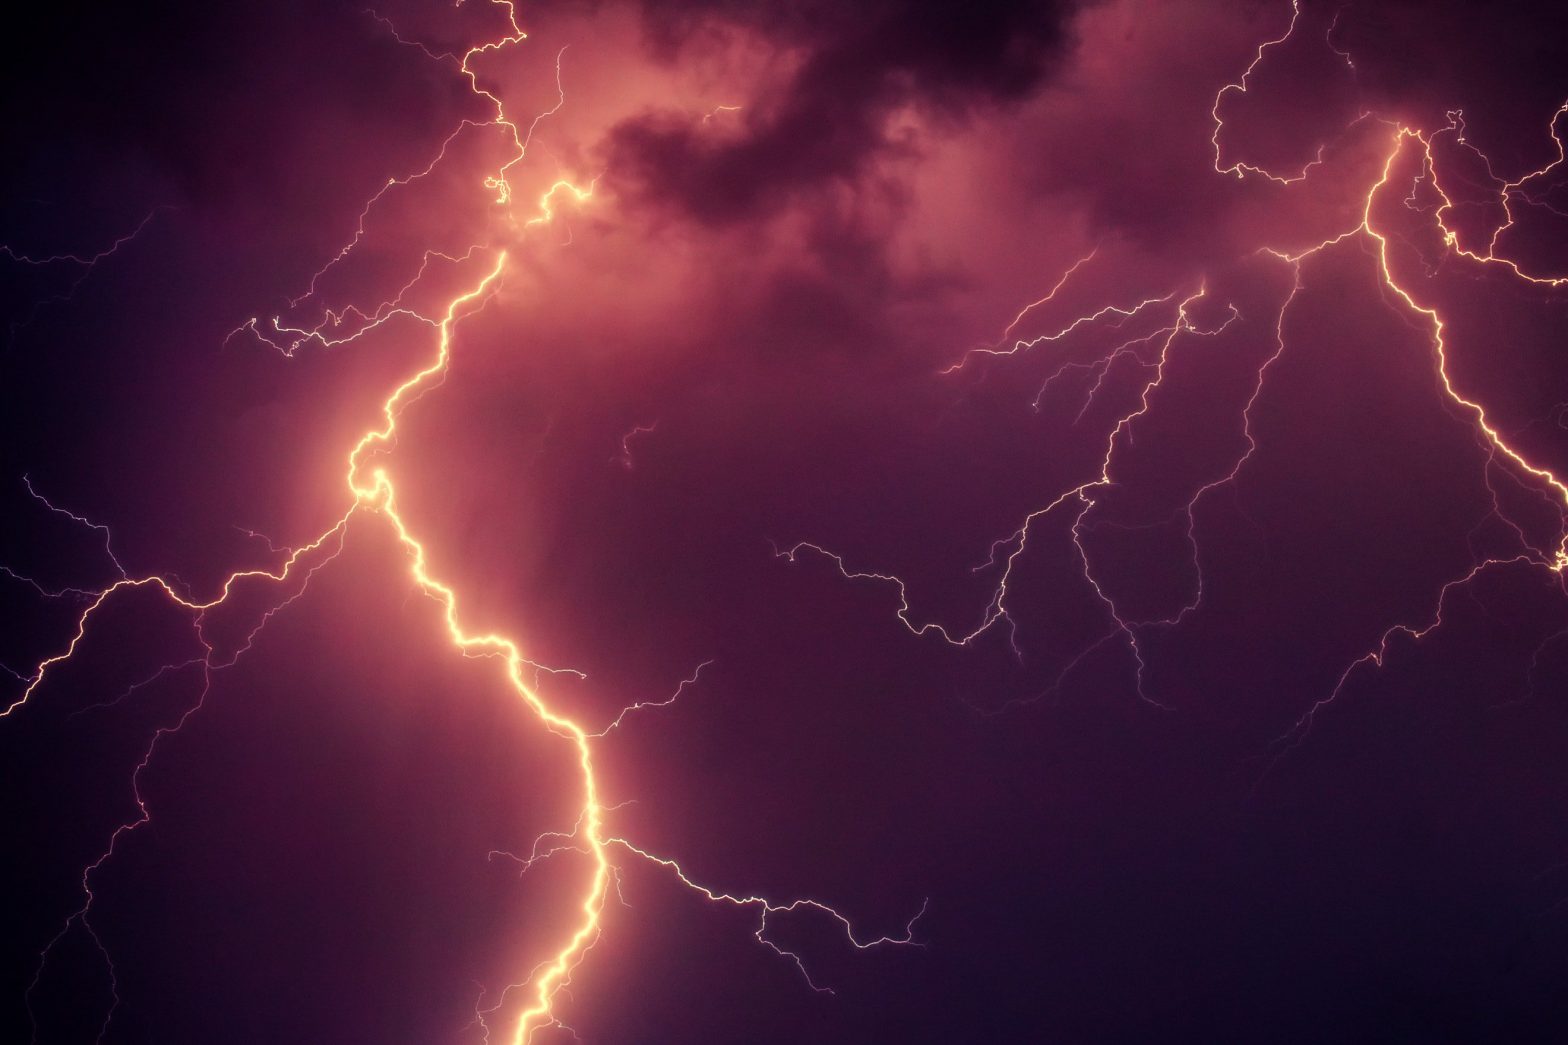 29 million under Thunderstorm Watch during July 4th weekend | Watch Video